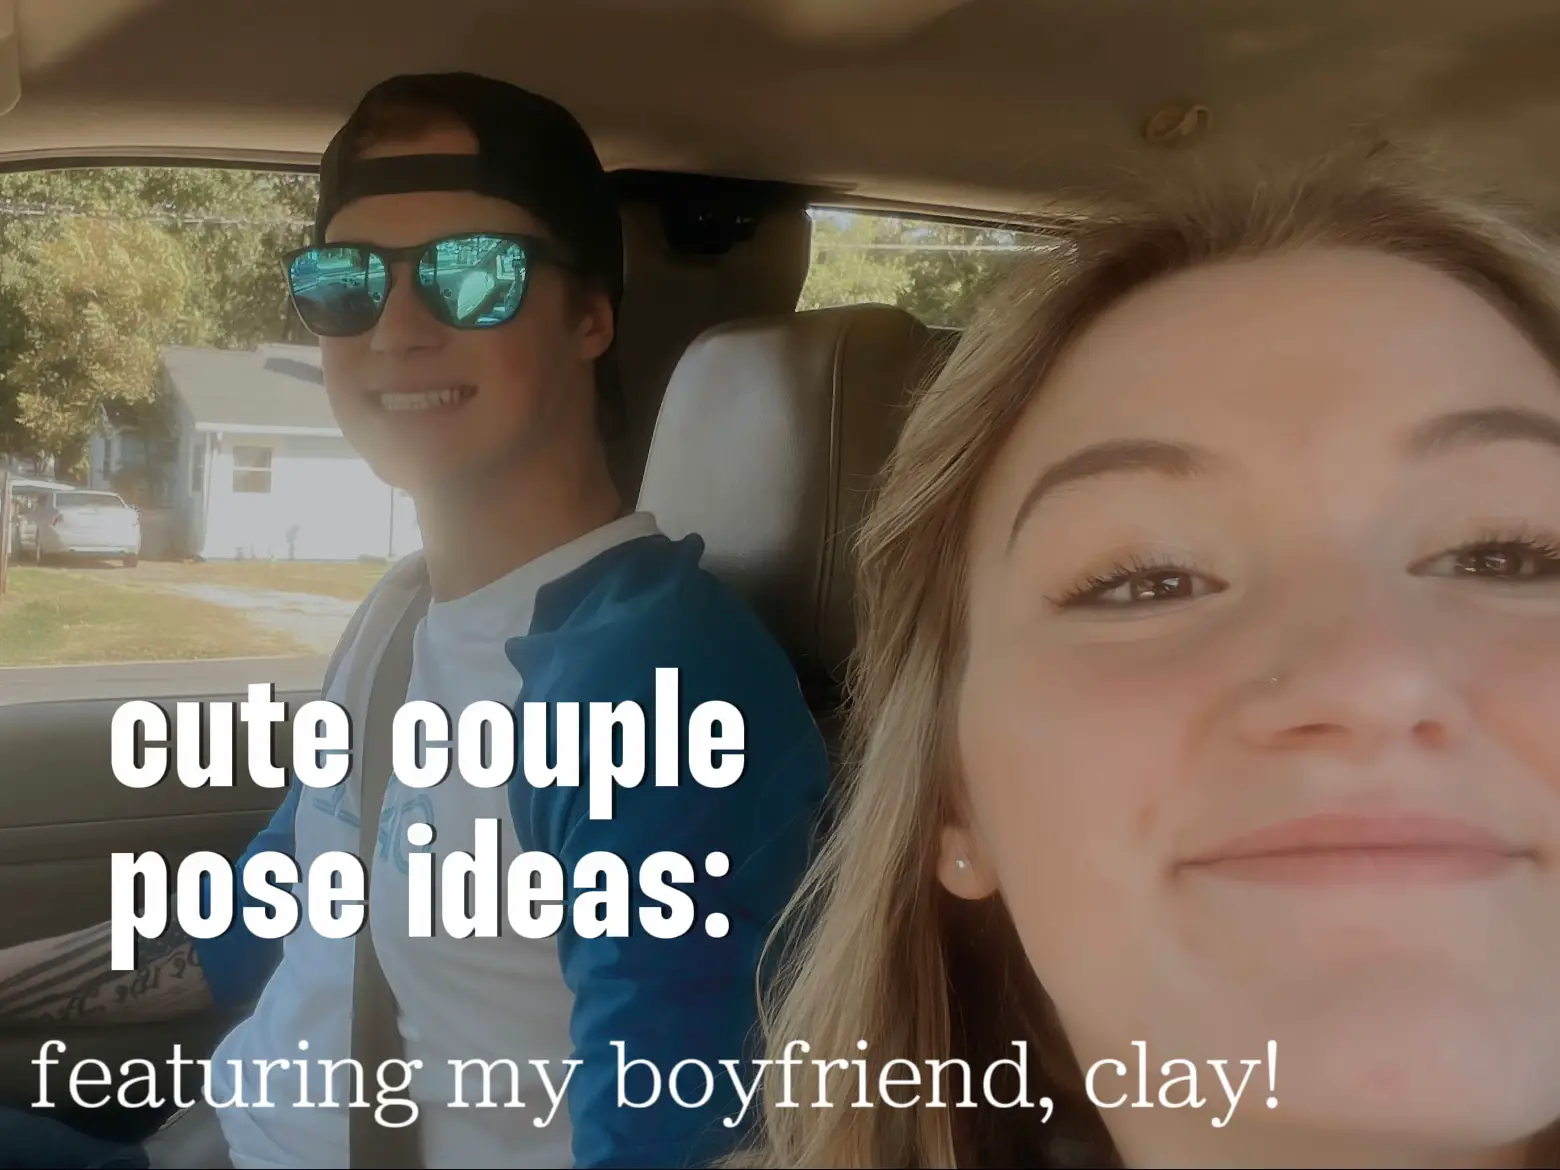 41 Cute Couple Things All Guys & Girls in Love Must Try At Least Once